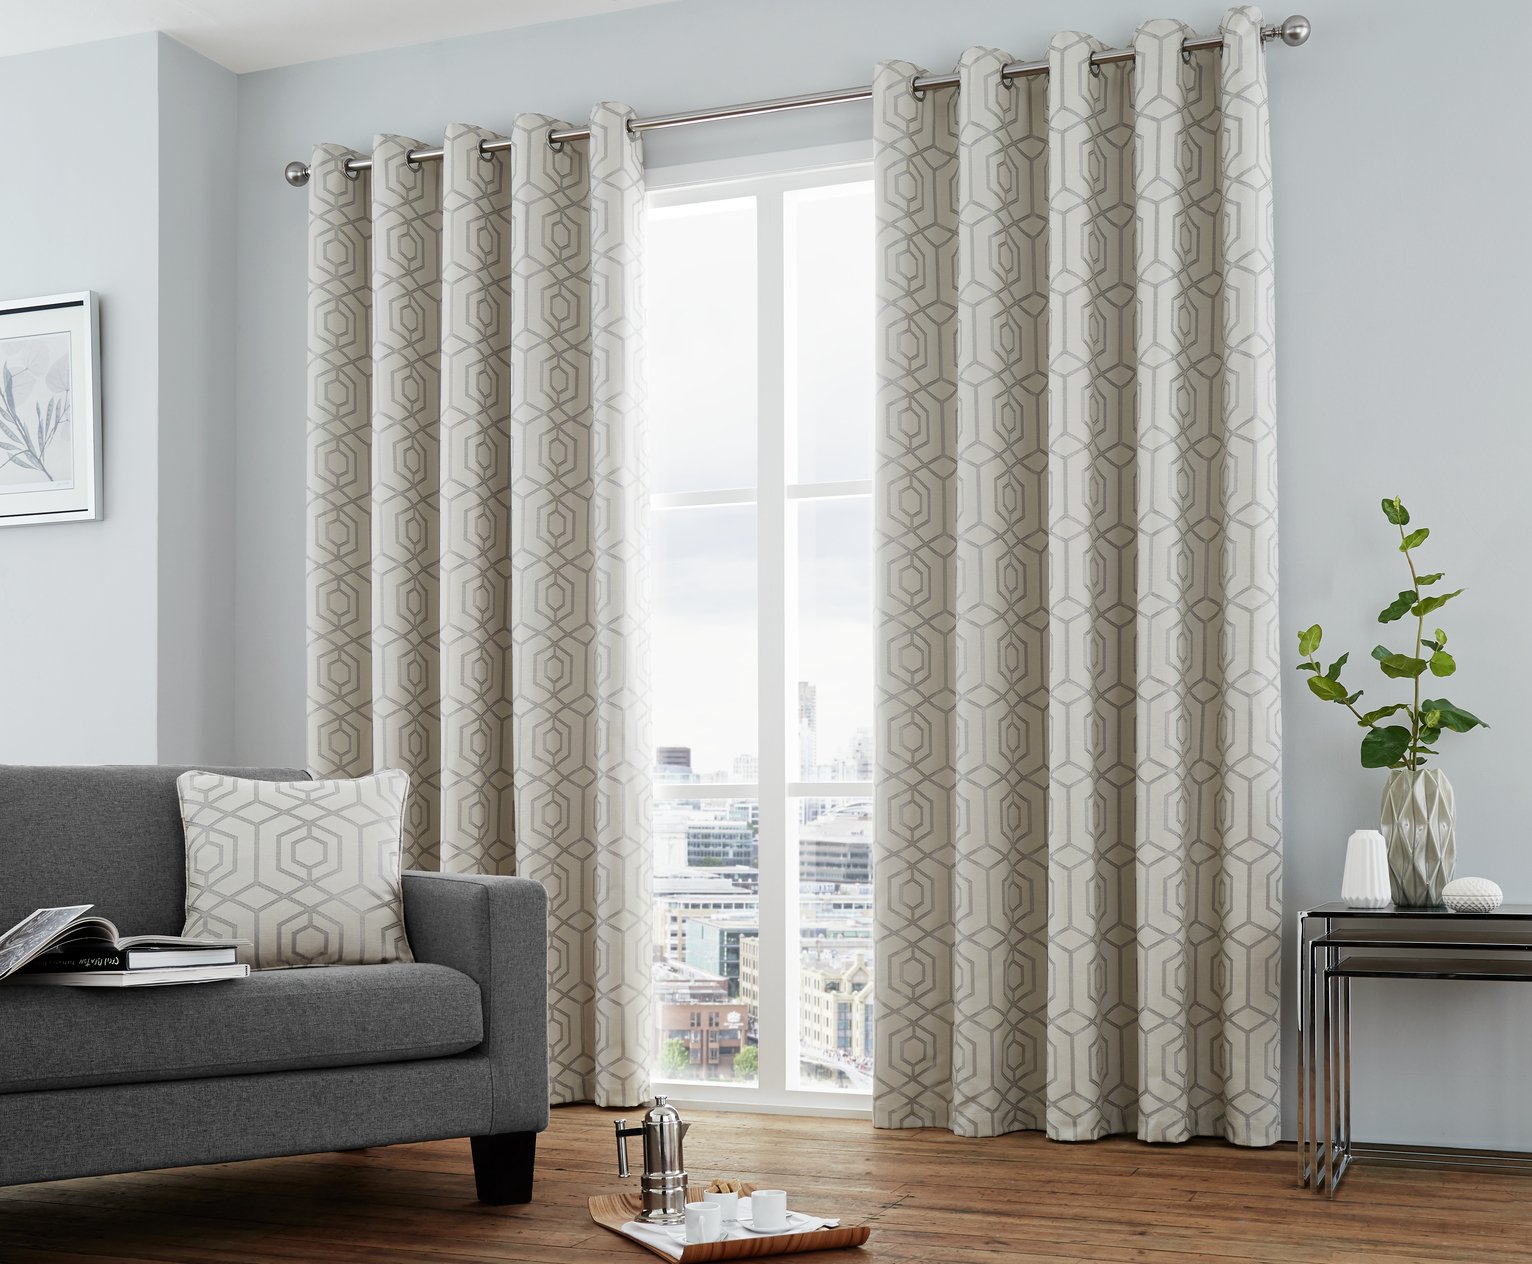 Curtina Camberwell Eyelet Curtains - 168x229cm - Silver